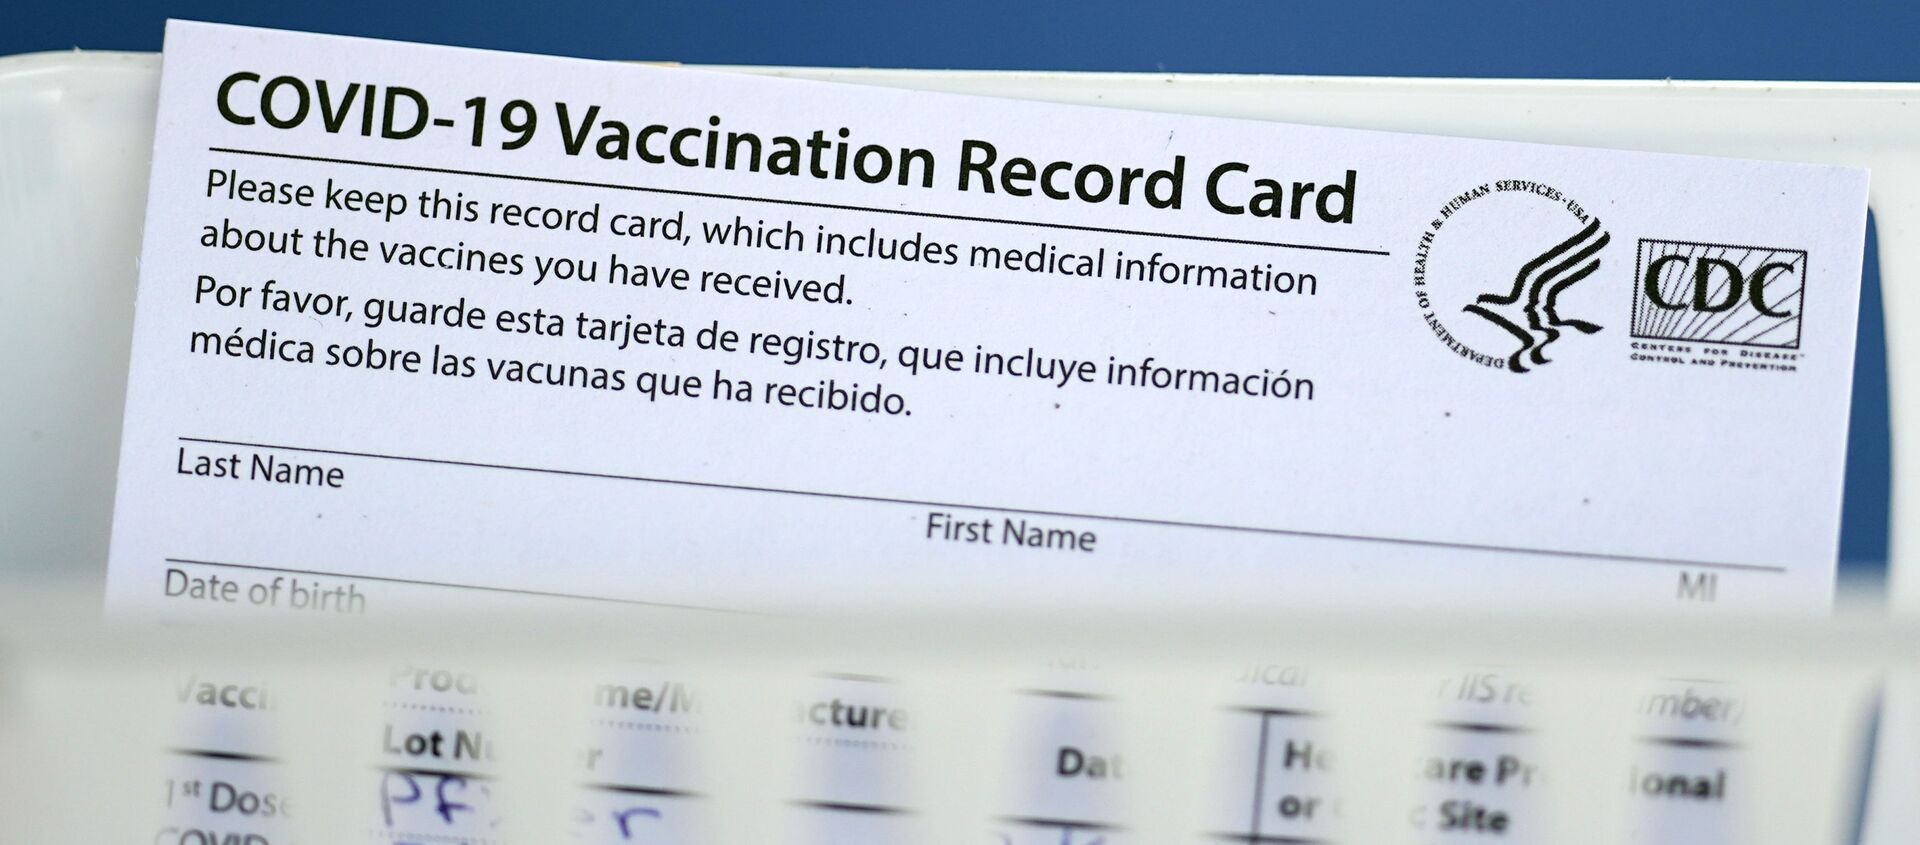 A vaccination record card is shown during a COVID-19 vaccination drive for Spring Branch Independent School District education workers Tuesday, March 16, 2021, in Houston. - Sputnik International, 1920, 06.04.2021